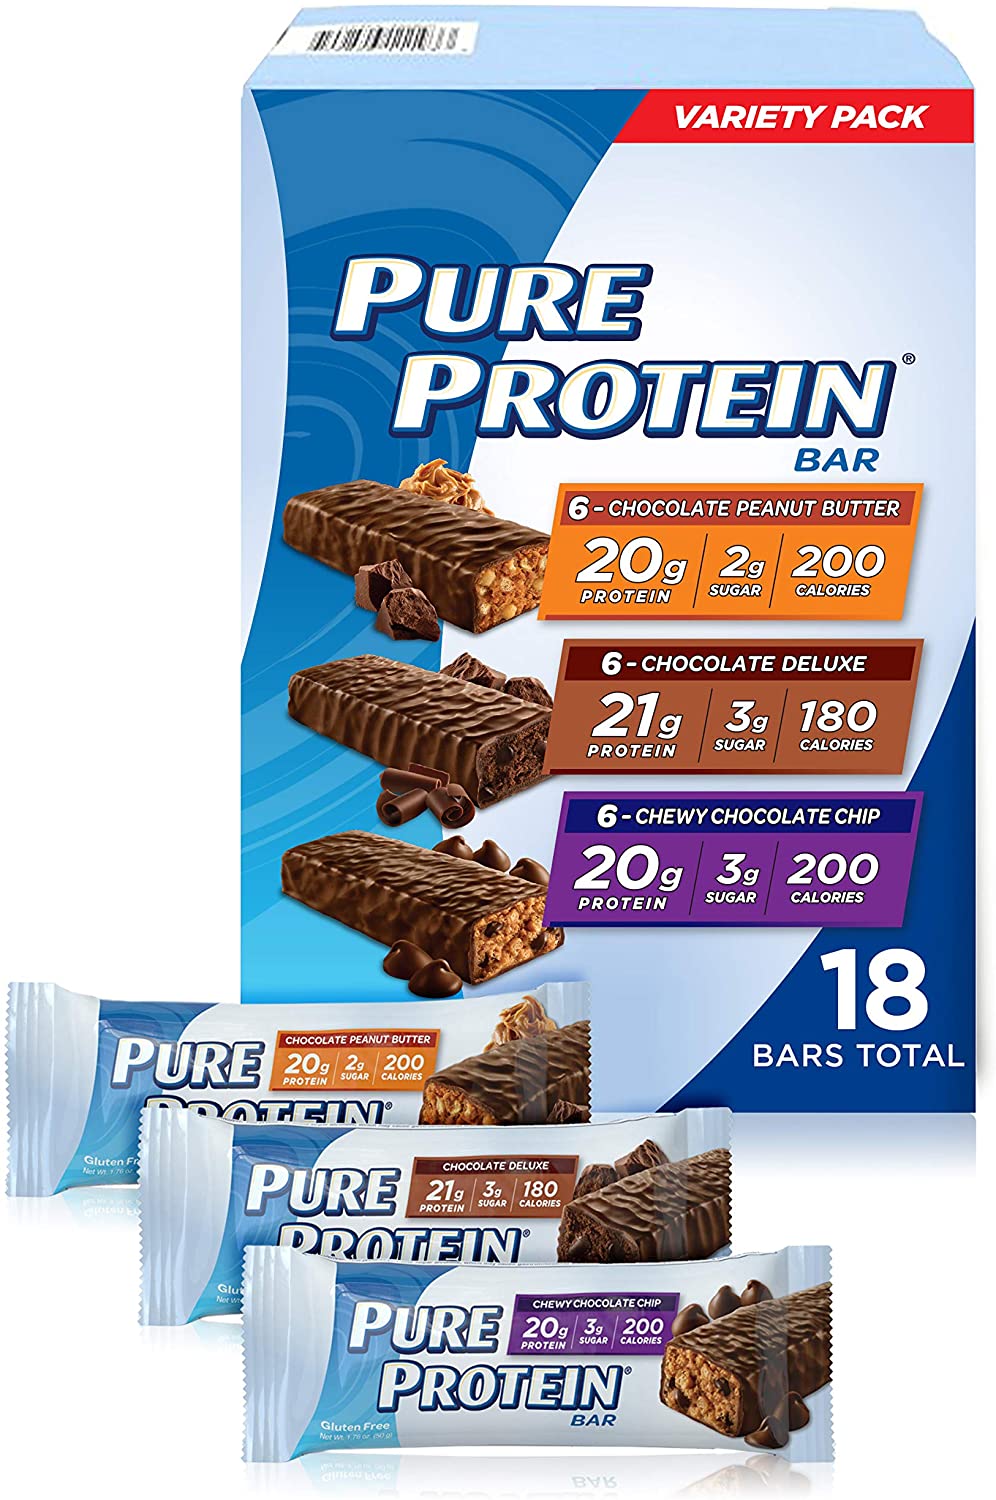 Pure Protein Bars, High Protein, Nutritious Snacks to Support Energy, Low Sugar, Gluten Free, Variety Pack, 1.76oz, 18 Pack  $7 shipped